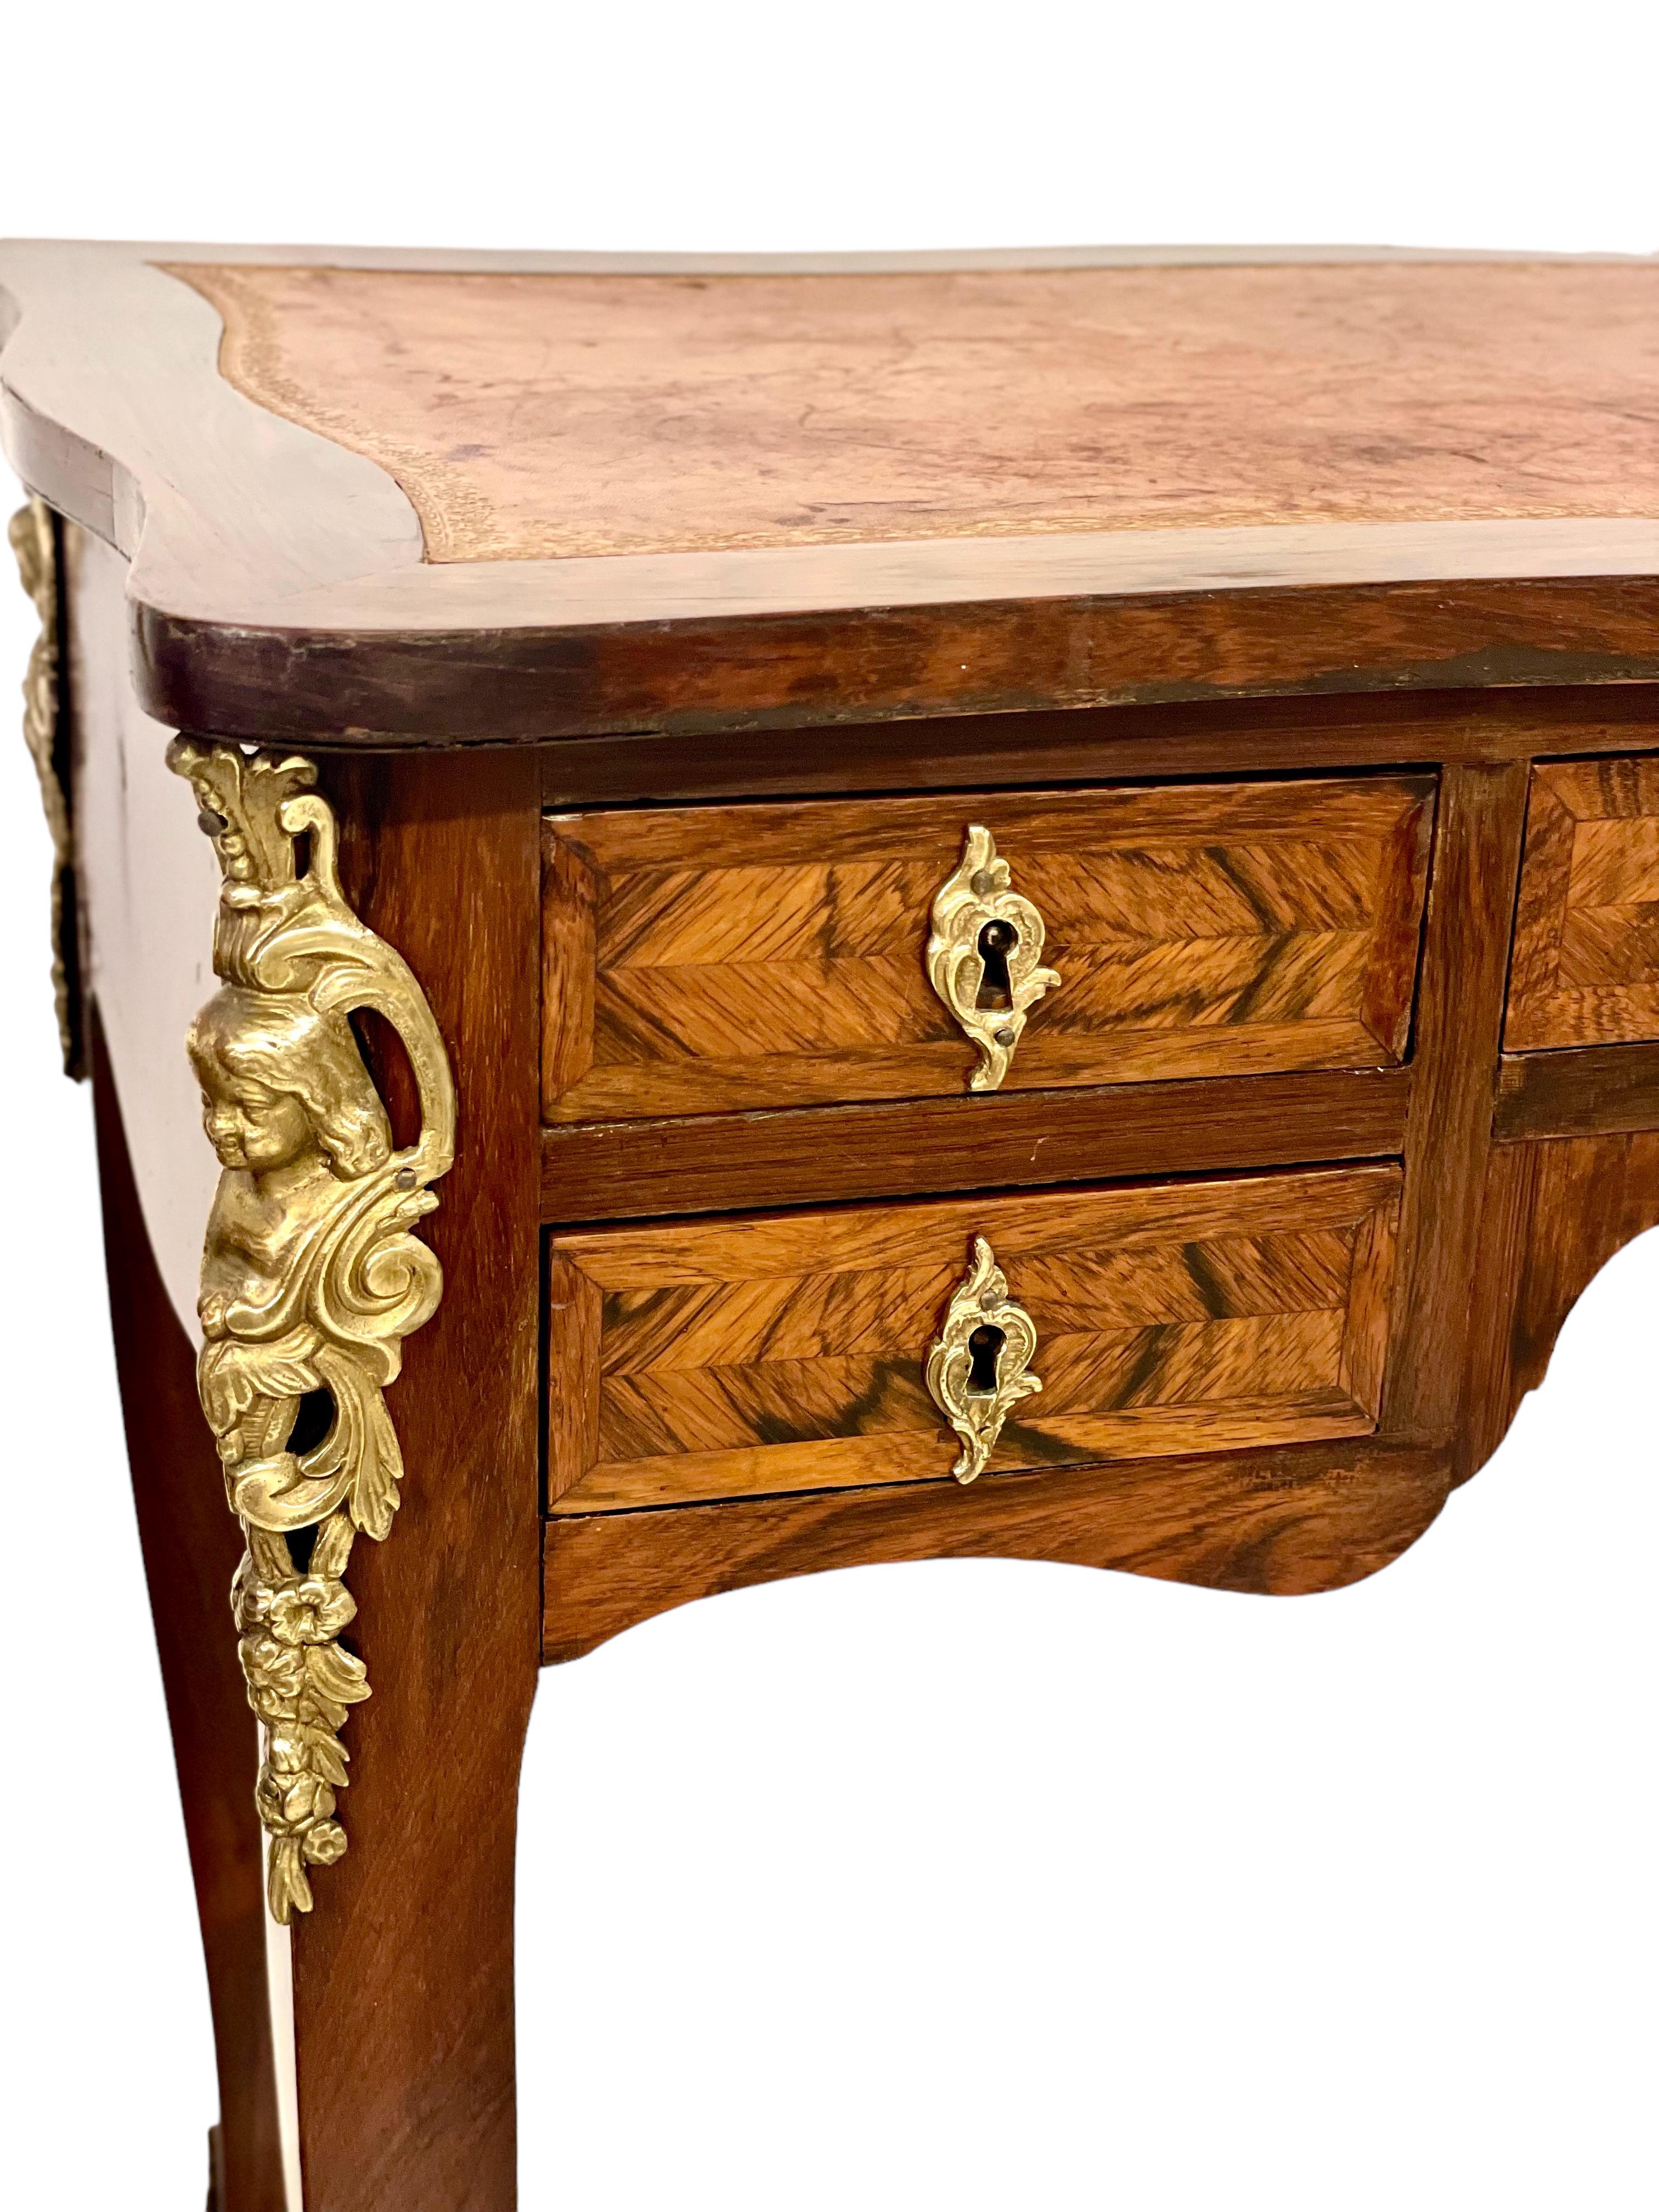 1750s Gilt Bronze Mounted Writing Lady Desk, by Adrien DELORME For Sale 6